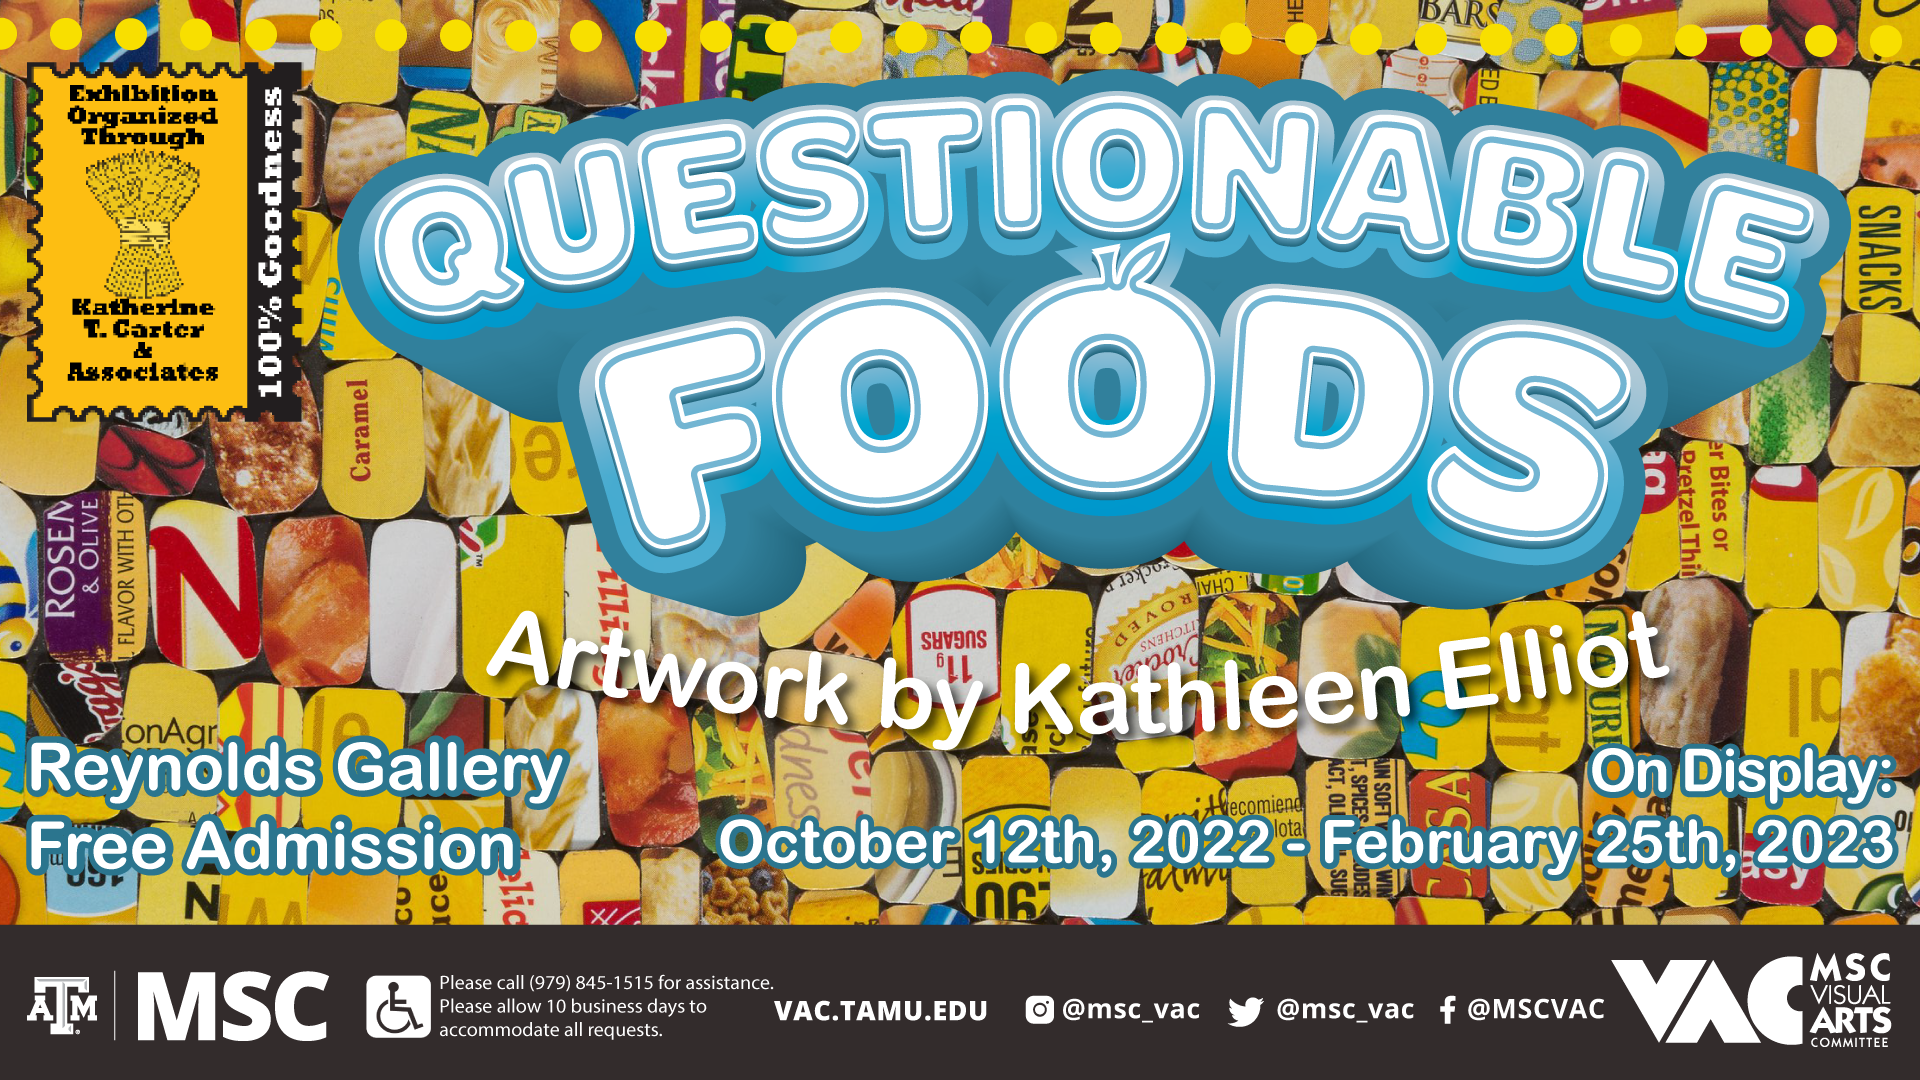 MSC VAC Presents Questionable Foods Artwork by Kathleen Elliot, On display: October 12, 2022- February 5, 2023 at the Reynolds Gallery, Free admission. Website: vac.tamu.edu, Instagram: @msc_vac, Twitter: @msc_vac, Facebook: @MSCVAC Please call 979 845 1515 for assistance. Please allow 10 business days to accommodate all requests. Exhibition Organized Through Katherine T. Carter & Associates, 100% Goodness